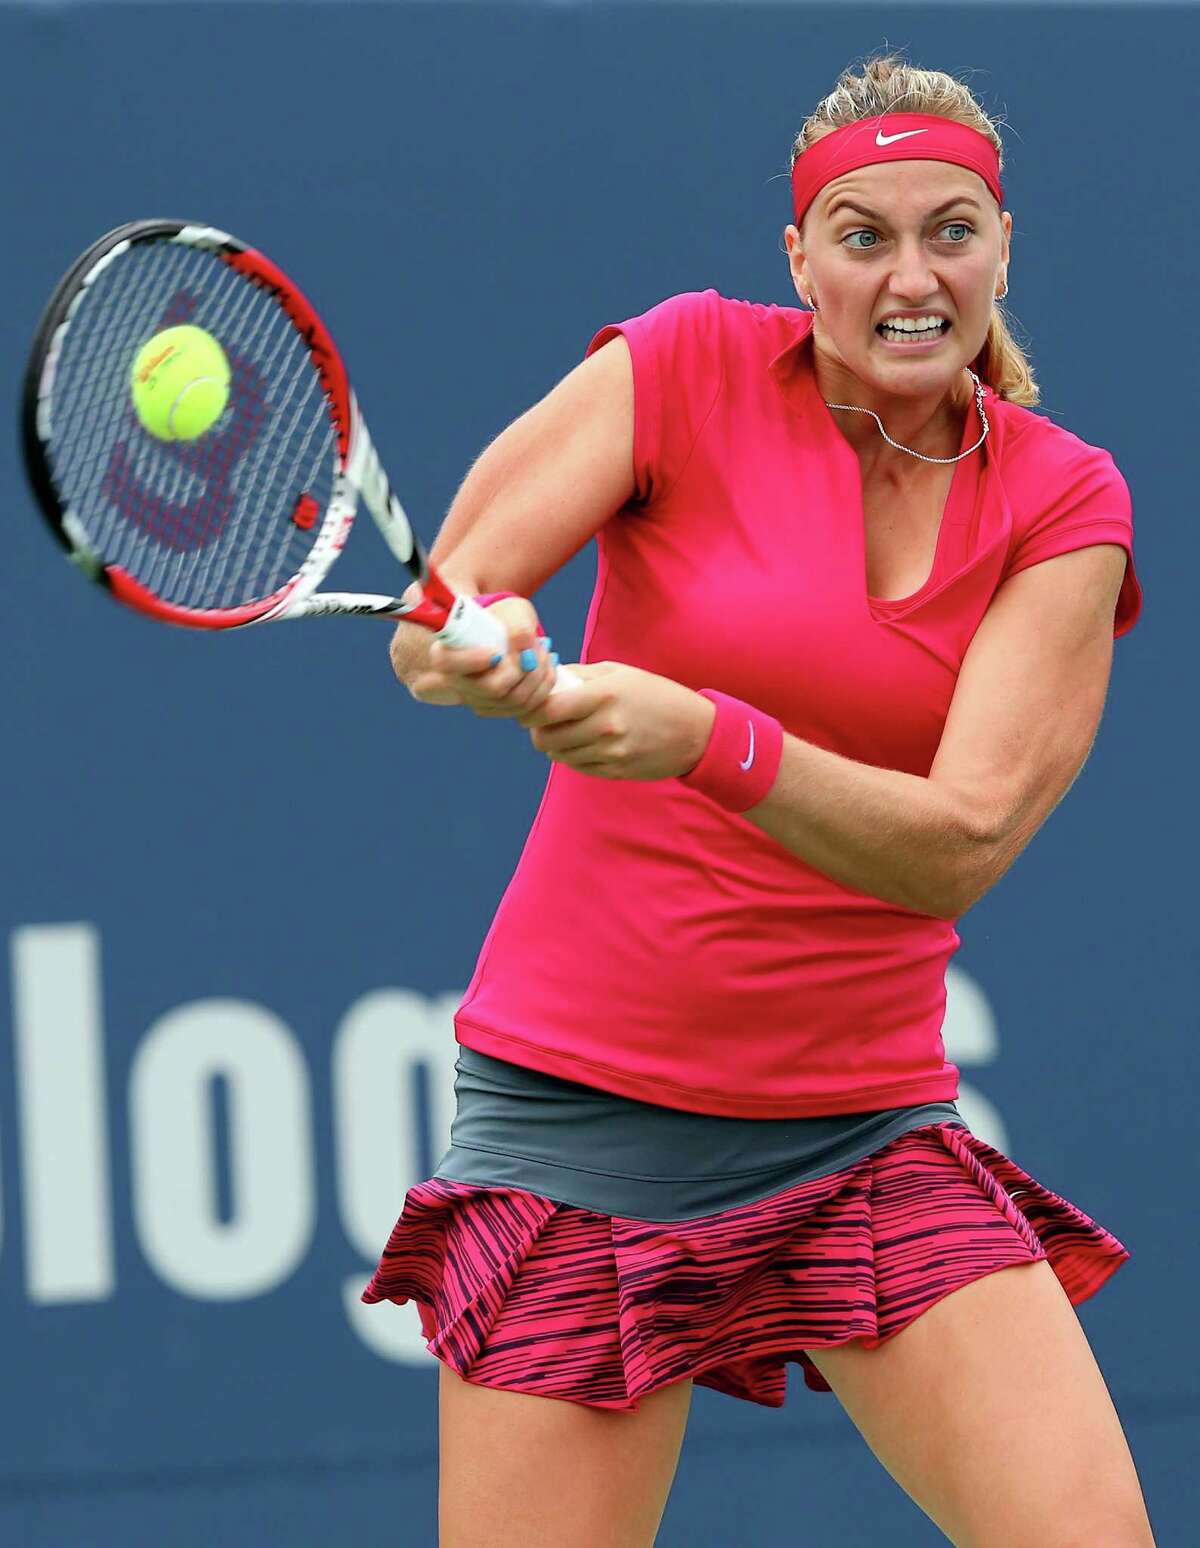 NEW HAVEN, CT - AUGUST 21: Petra Kvitova of the Czech Republic returns a shot to Barbora Zhlavova Strycova of the Czech Republic during the Connecticut Open at the Connecticut Tennis Center at Yale on August 21, 2014 in New Haven, Connecticut.